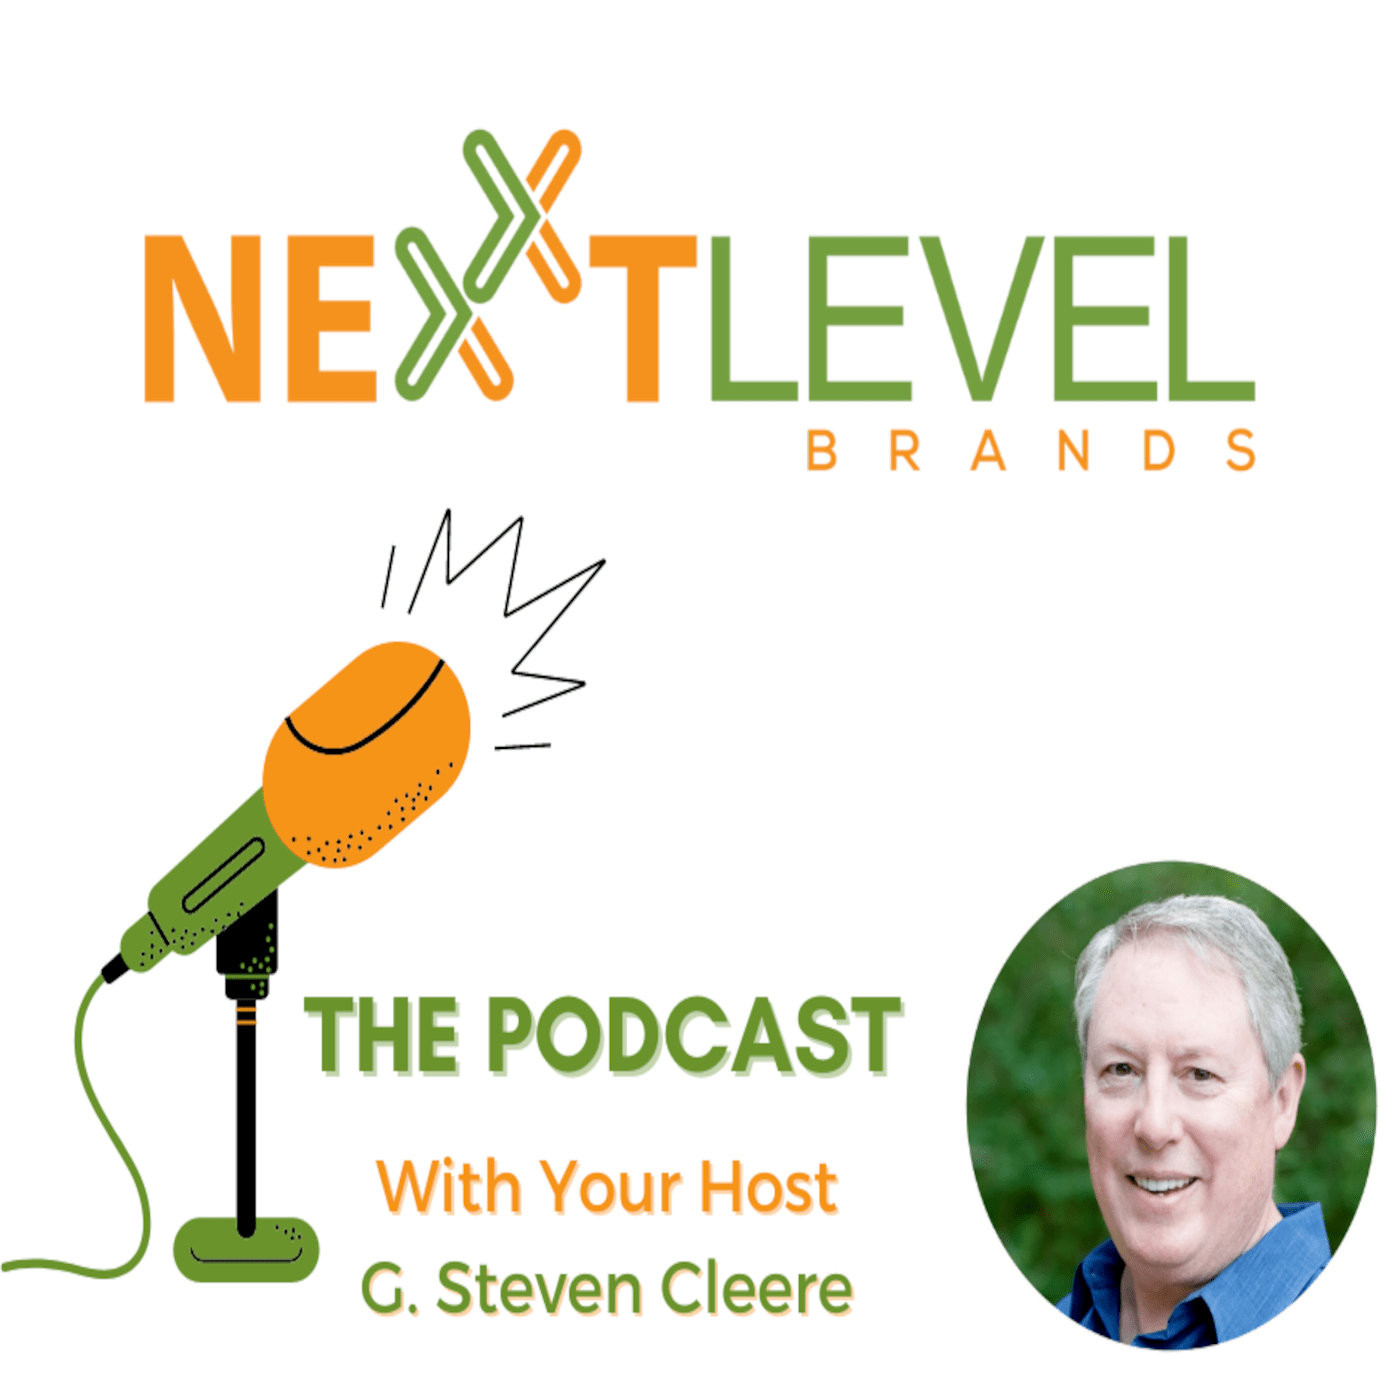 Better For You Kid's Drinks - Poppilu on the NexxtLevel Podcast!